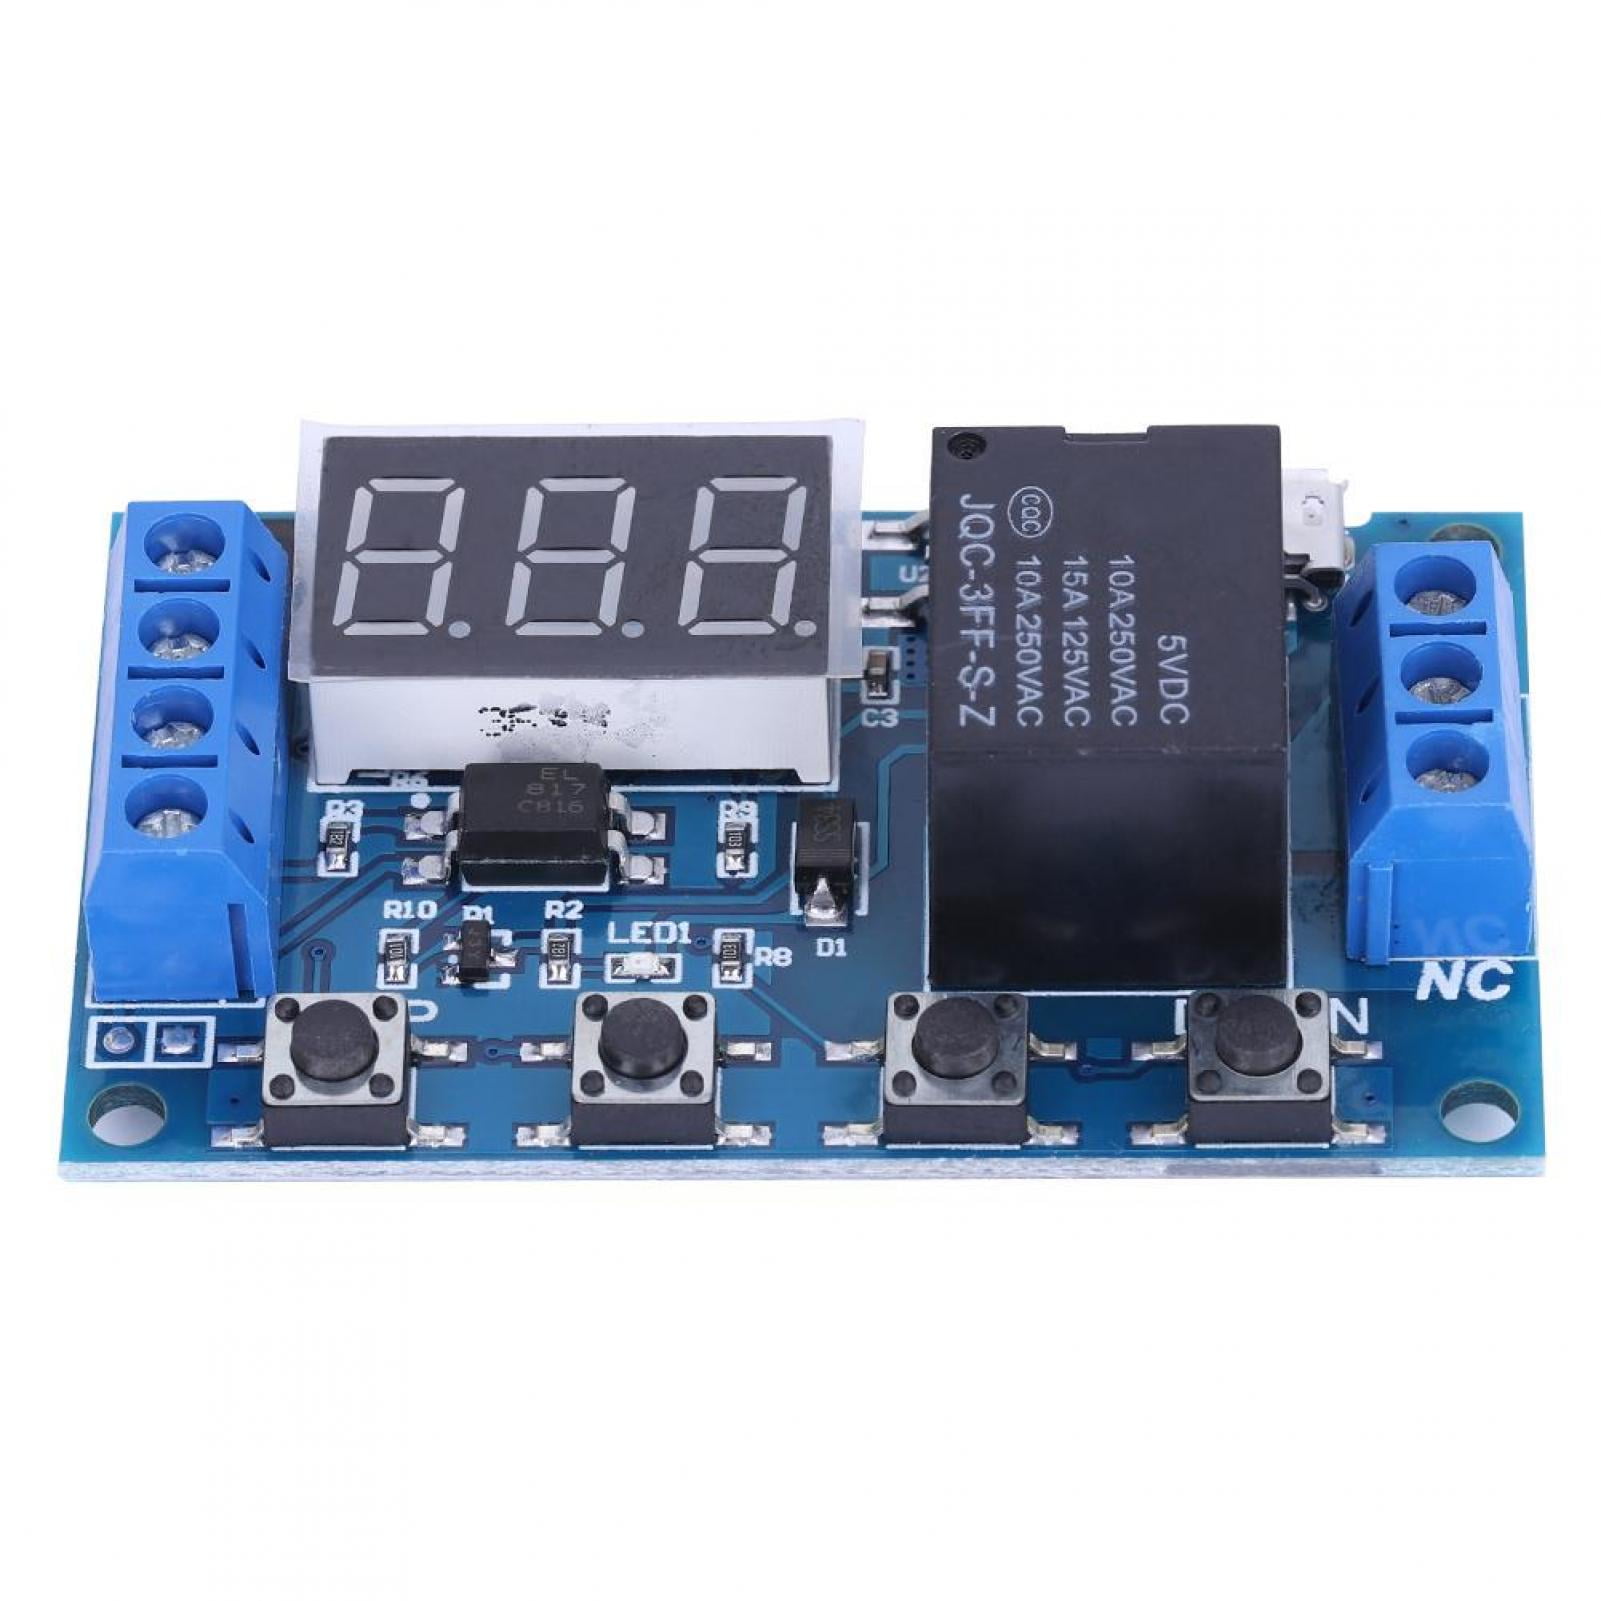 Timer Module-DC 6V~30V Trigger Delay On/Off Cycle Timer Relay Switch Module Board w/Digit LED Display Micro USB 5V 